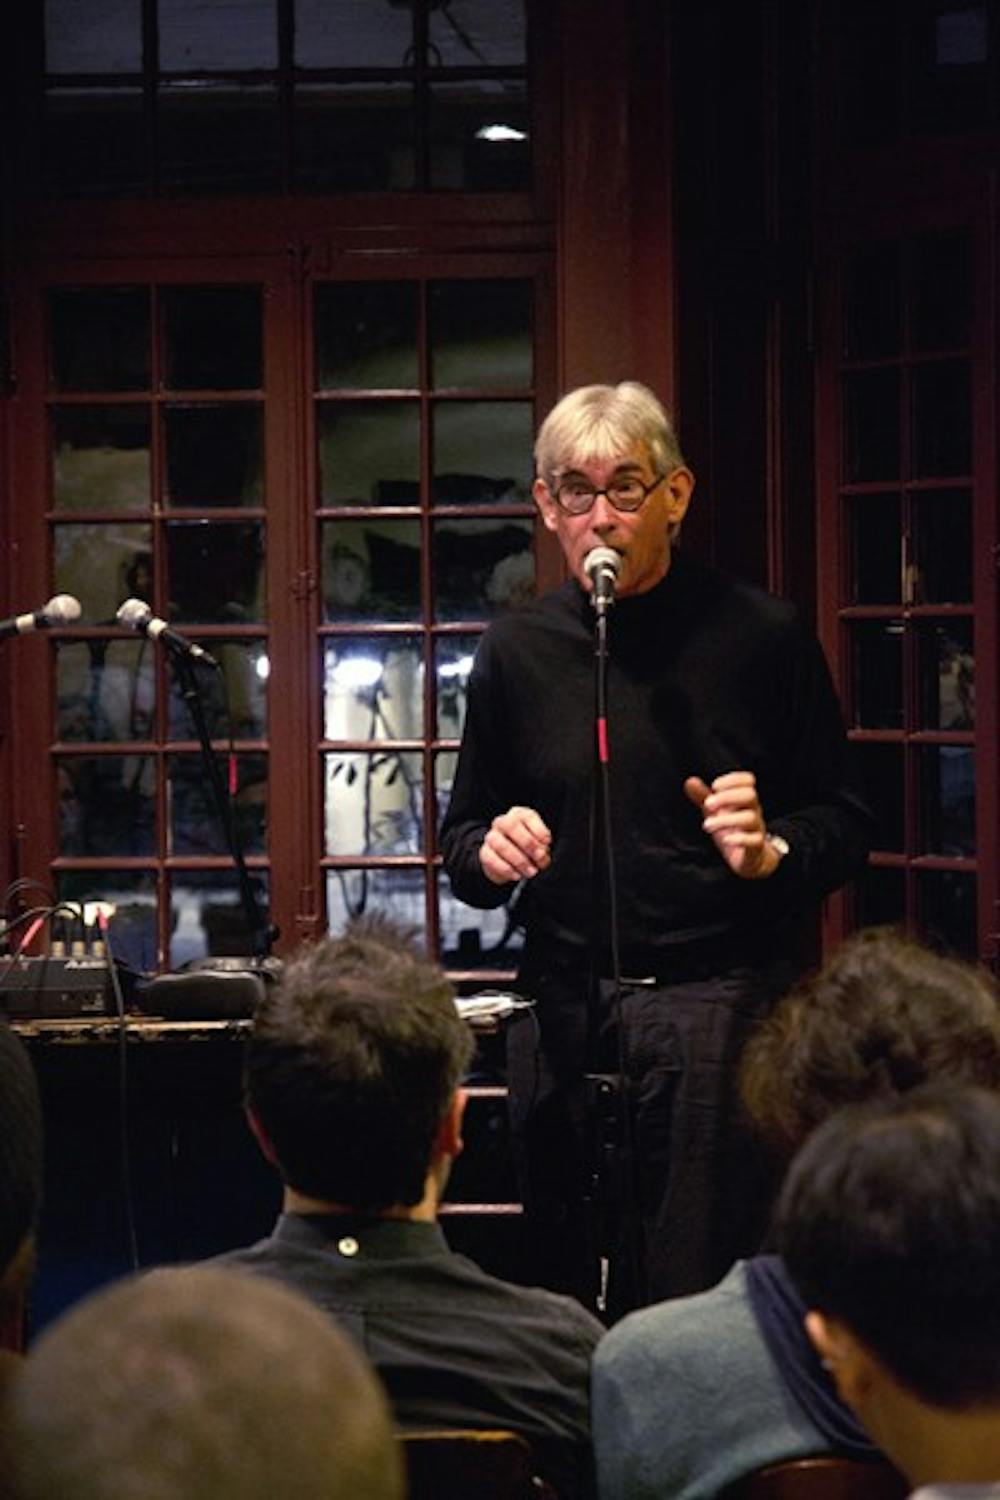 Jaap Blonk is a Sound Poet who performs poetry using only sounds made by his mouth.